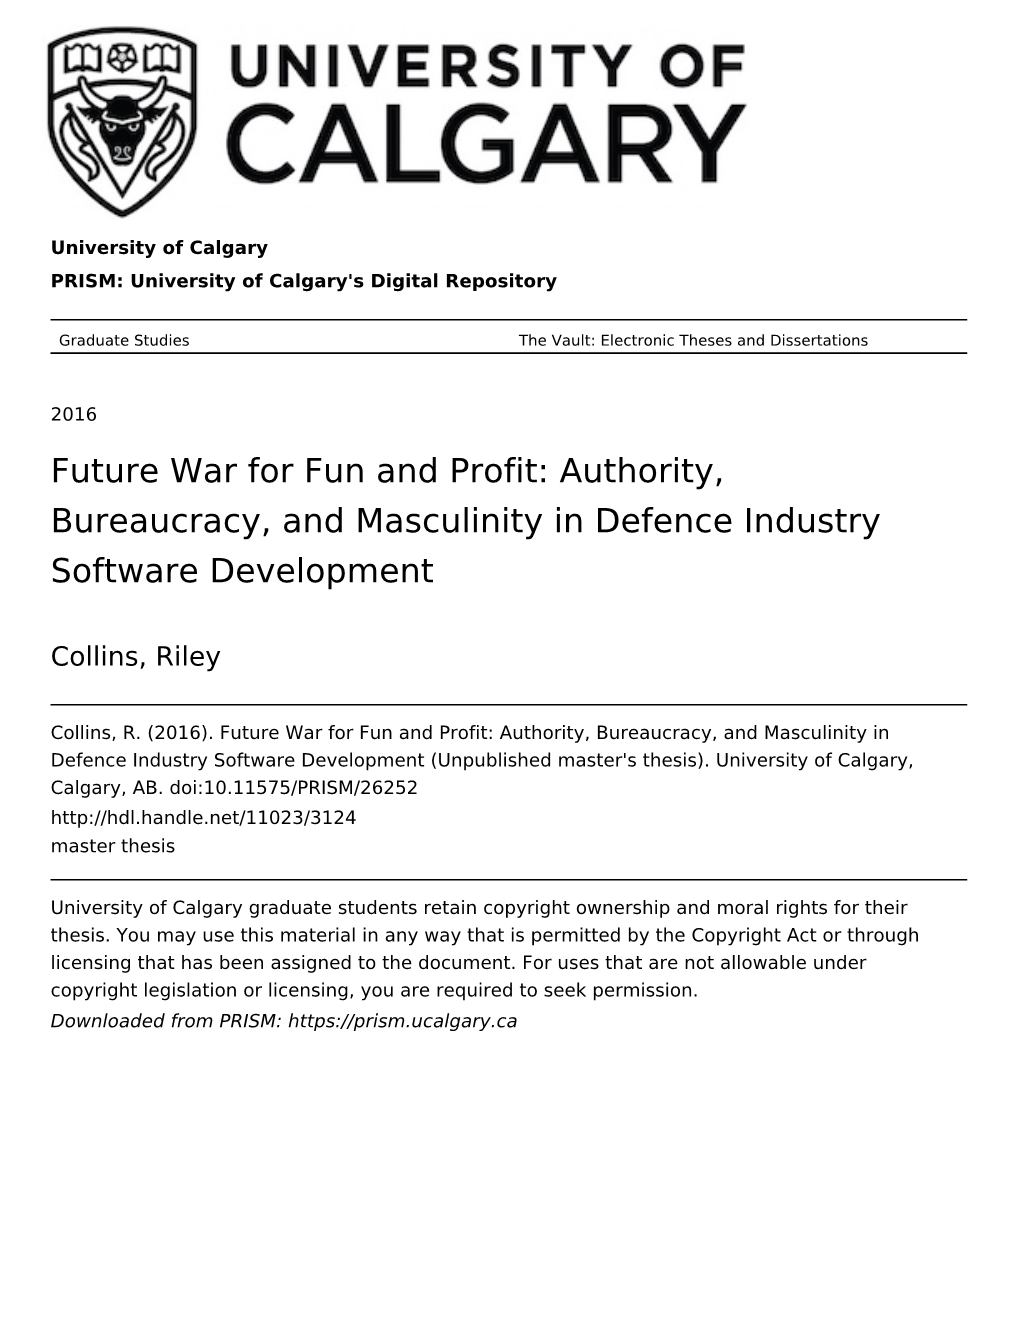 Future War for Fun and Profit: Authority, Bureaucracy, and Masculinity in Defence Industry Software Development